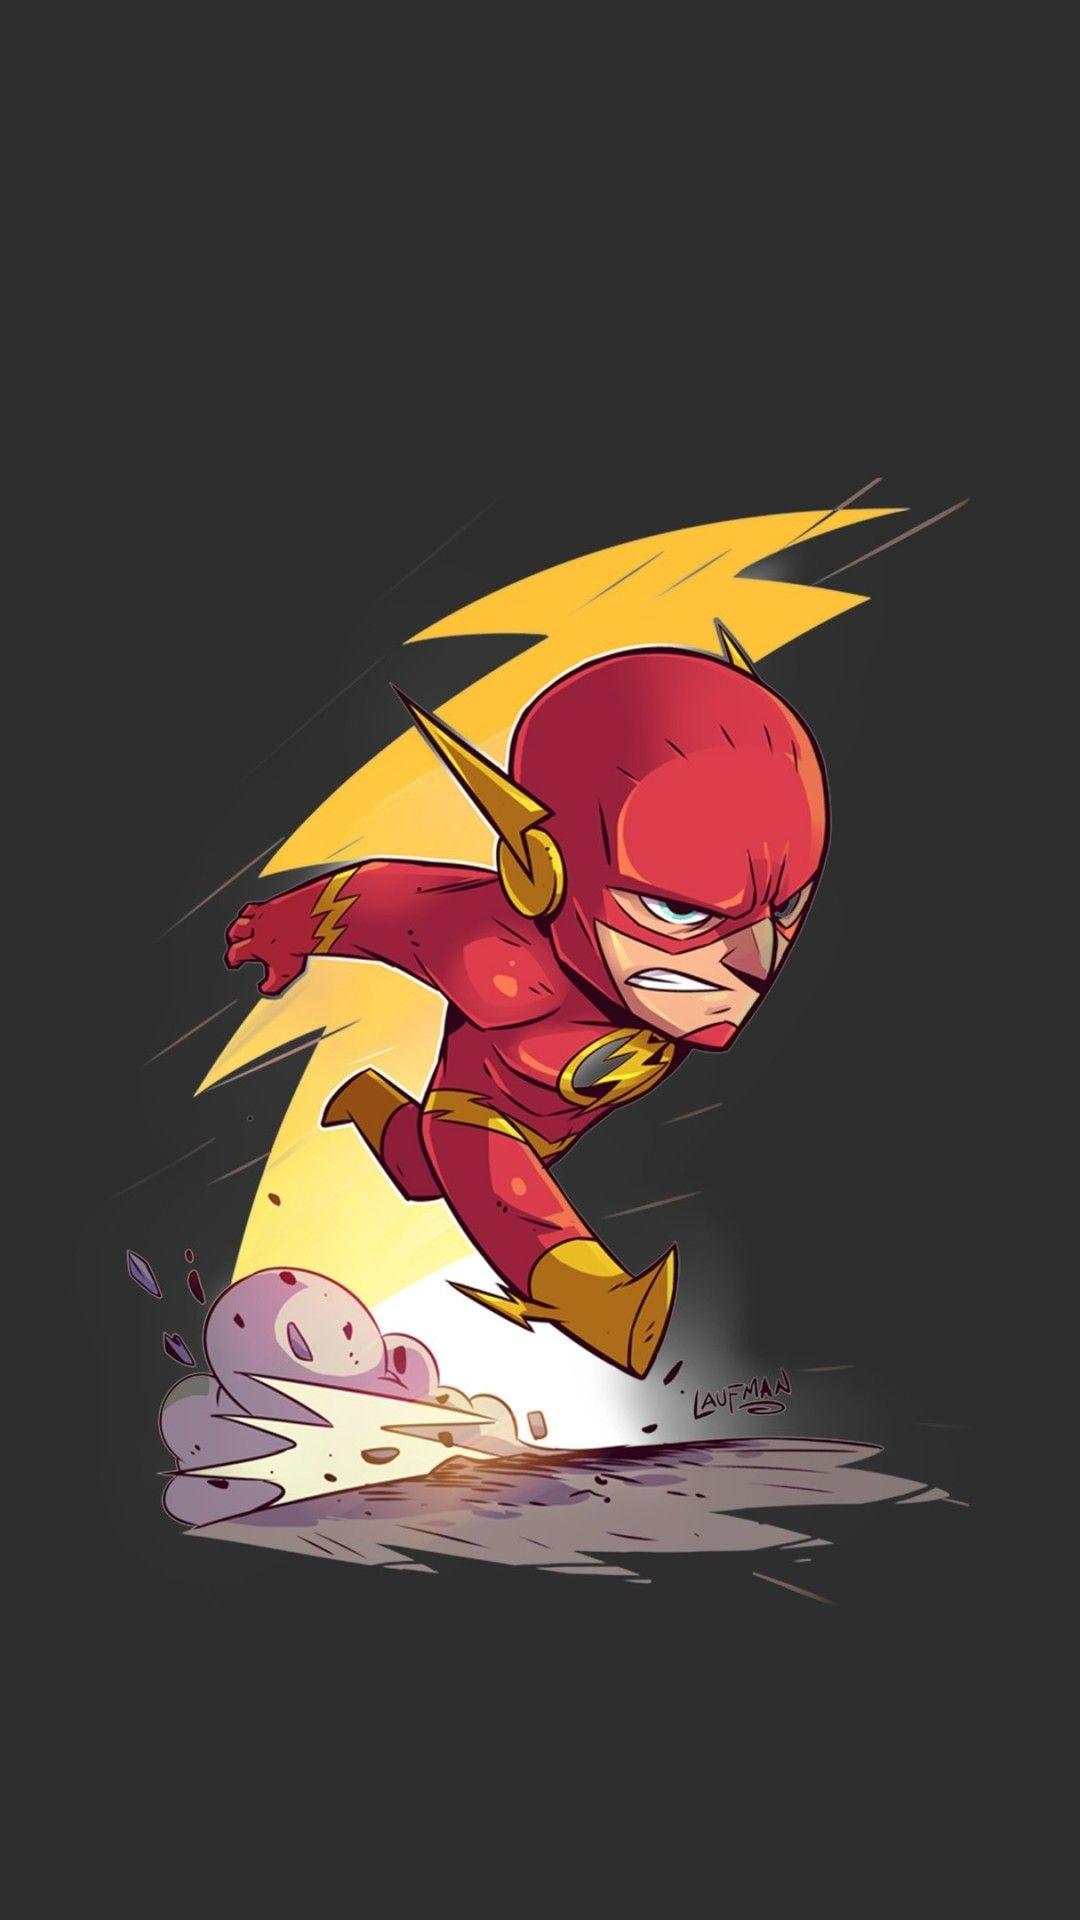 The Flash iPhone Wallpaper Free The Flash iPhone